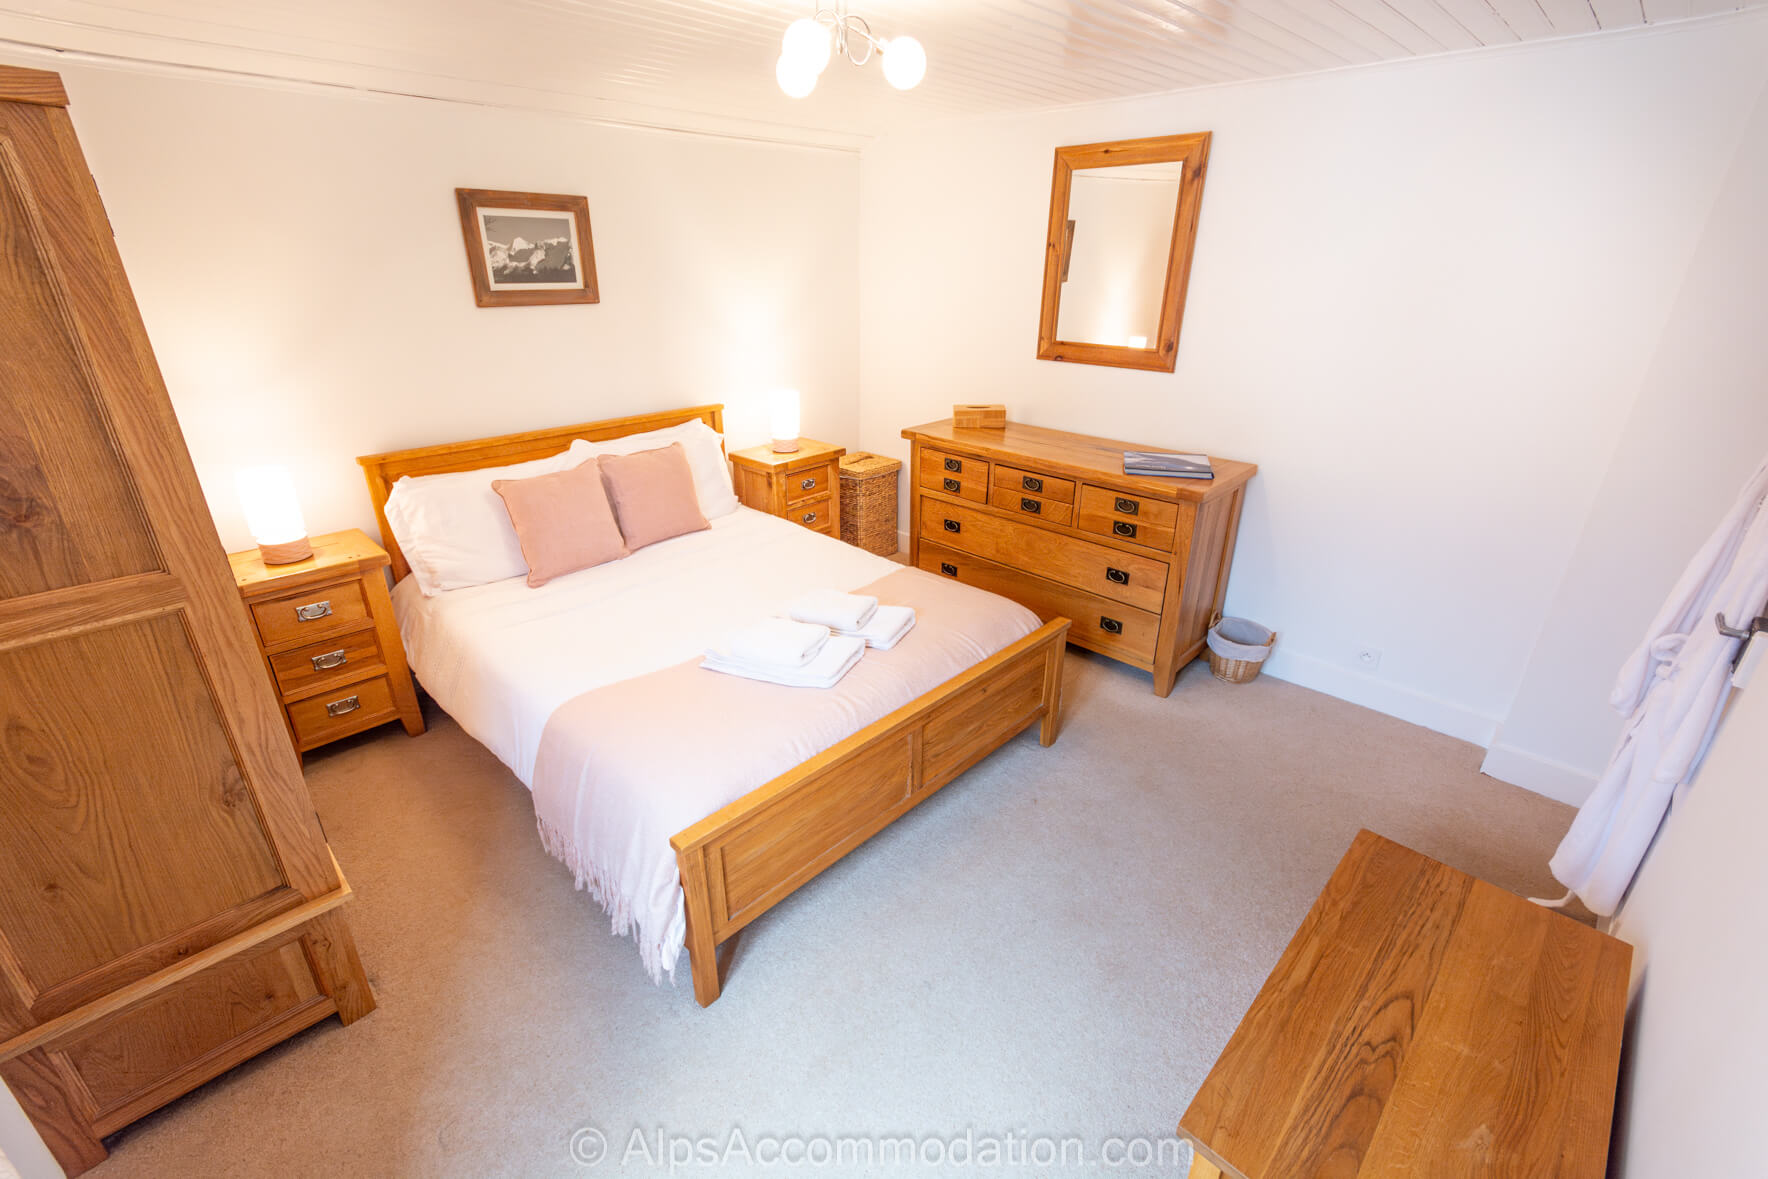 Chalet Chamoissière Samoëns - King size bed, high quality mattresses and luxurious linen ensure a comfortable night